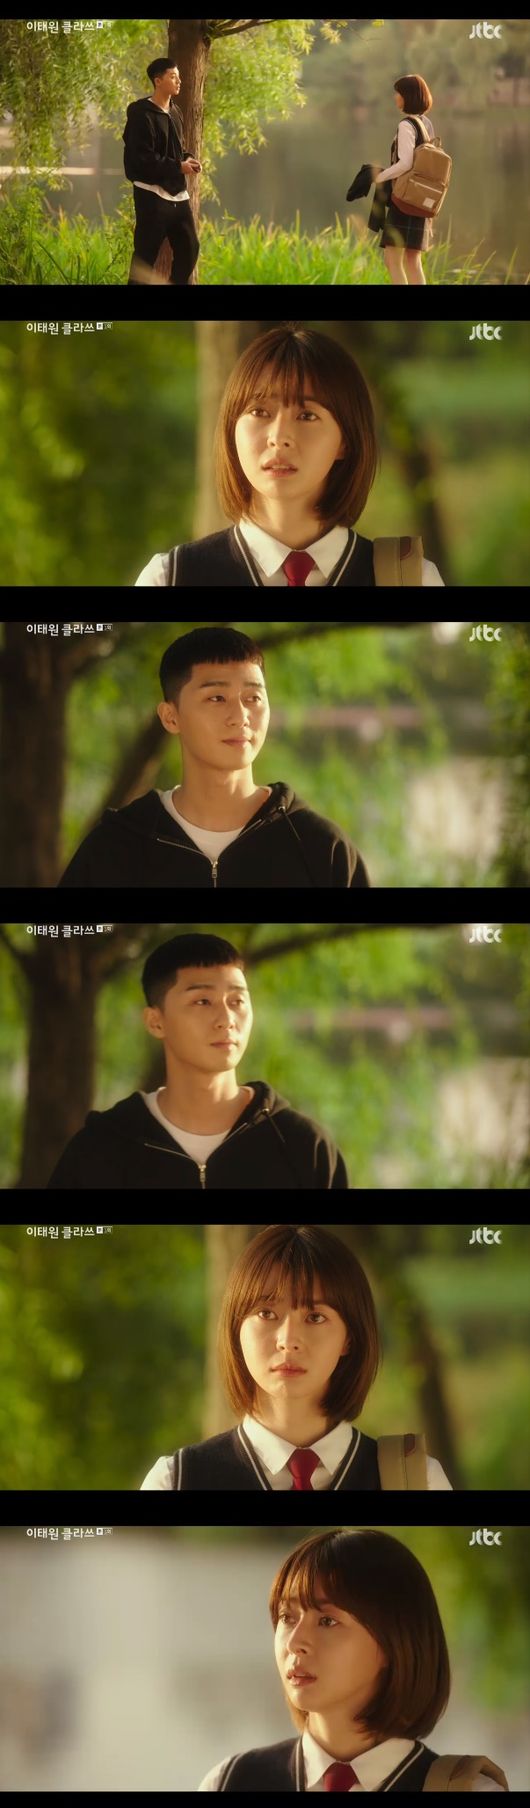 In Itaewon Class, Park Seo-joon asked Kwon Nara for the number, saying, I want to be Friend.JTBCs Itaewon Class (playplayplay by Cho Kwang-jin, directed by Kim Sung-yoon) aired on the afternoon of the 31st, the heartfelt feelings of Park Seo-joon and Oh Soo-ah (Kwon Nara) came and went.The first two people I met at the subway station, Oh Soo-ah, who shook off the begging girls hand and was the first to meet when Roy blocked the girl from being hurt.Oh Soo-ah, in the words of Go and apologize right away, said, I like to comfort myself as a good person because I think I help others.The two will meet again through Park Sung-yeol (Son Hyun-joo), the father of Park Sae-sae.This time, Oh Soo-ah, who gave his hand to Oh Soo-ah, saying, I am trying to be friendly, shakes up I do not want to do that, but the next day Oh Soo-ah welcomes Park Roy as a class transfer student and a partner.Park, who was expelled from school after hitting Jang Geun-soo (Kim Dong-hee), who is a school violence student, accidentally encounters Oh Soo-ah, who is late for a university interview.Roy, who runs side by side to school with Oh Soo-ah and breathes as a running mate. Waits for Oh Soo-ah, who has been interviewed, and asks, Can you give me a number?I give it to Friend, I should not like it, said SuA, who wrote the number, and the new Roy left the room, saying, It does not know what people are doing.JTBC Itaewon Class captures broadcast screen